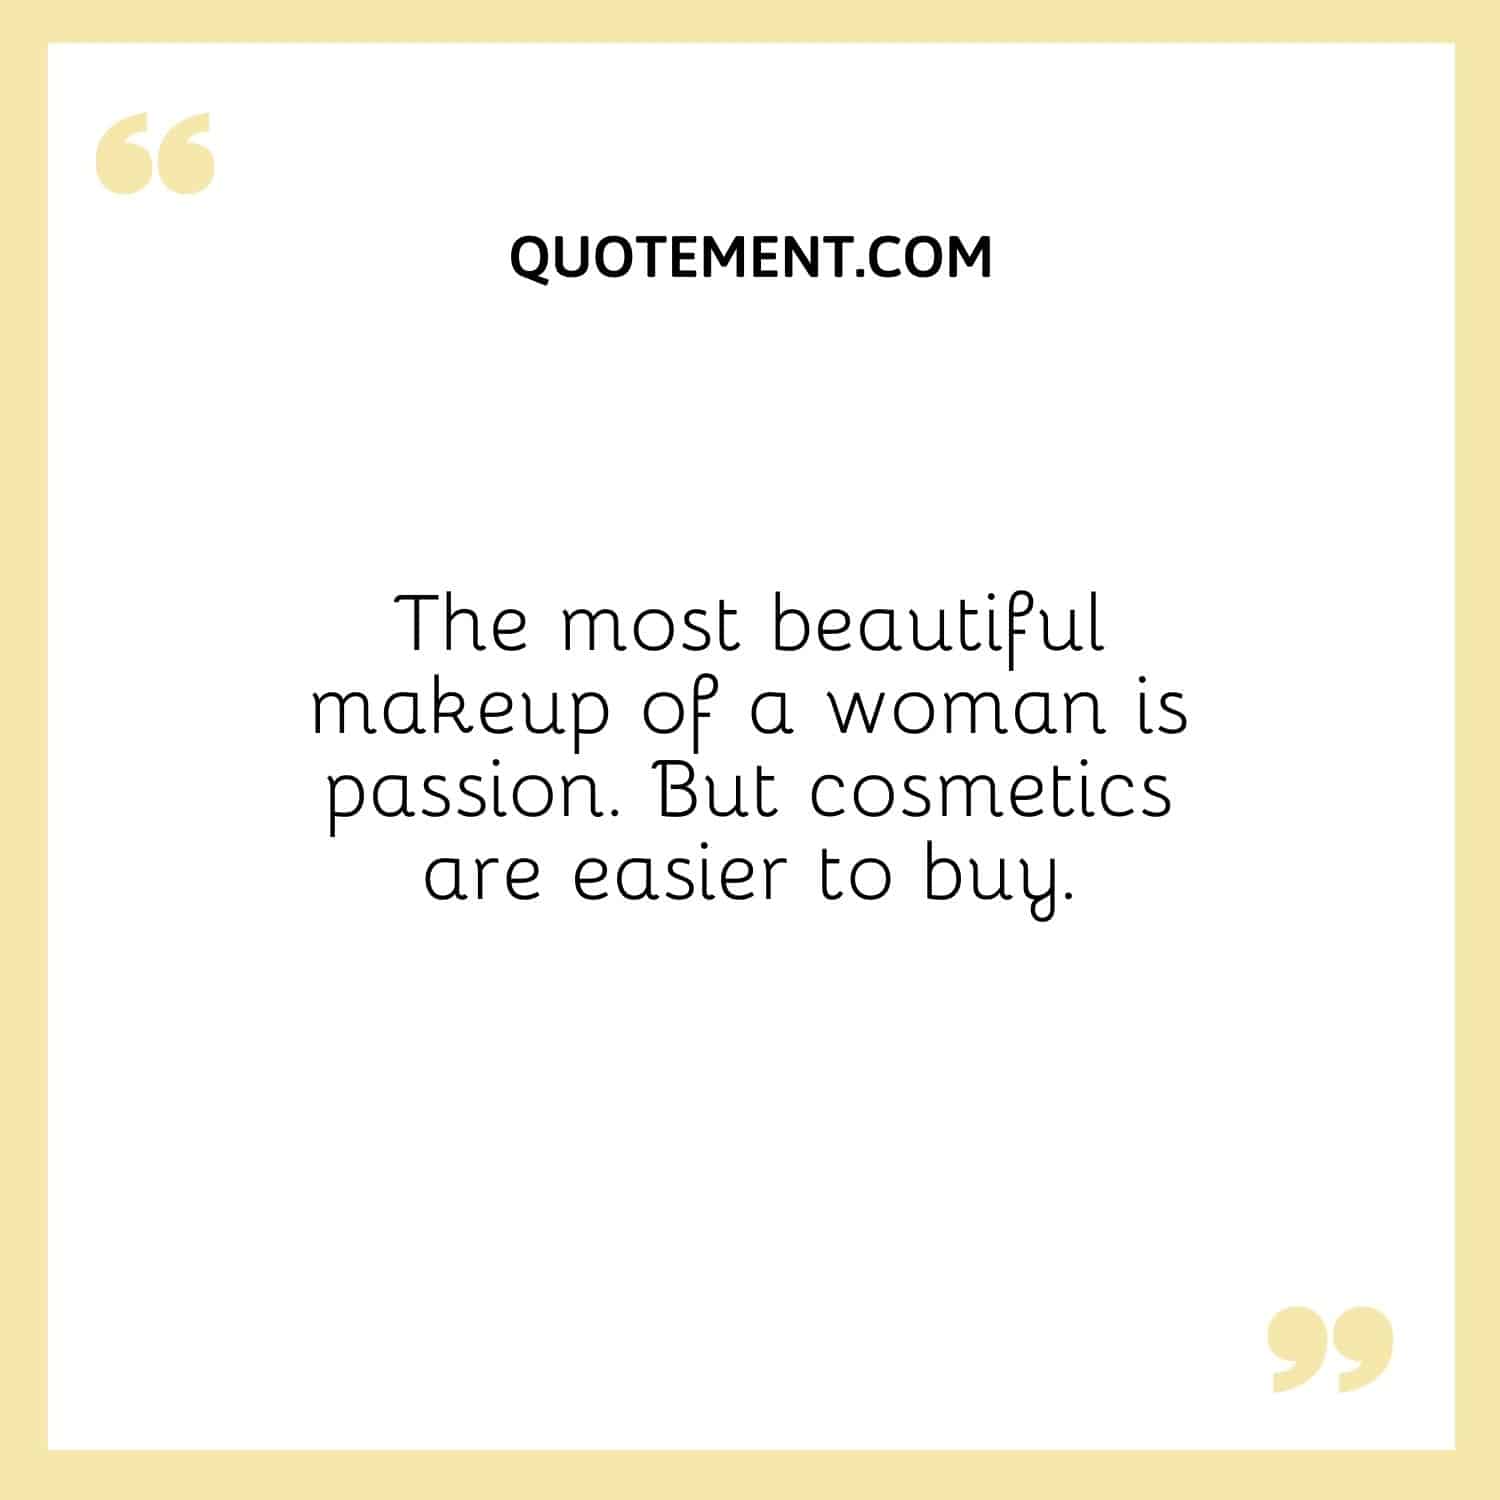 The most beautiful makeup of a woman is passion. But cosmetics are easier to buy.